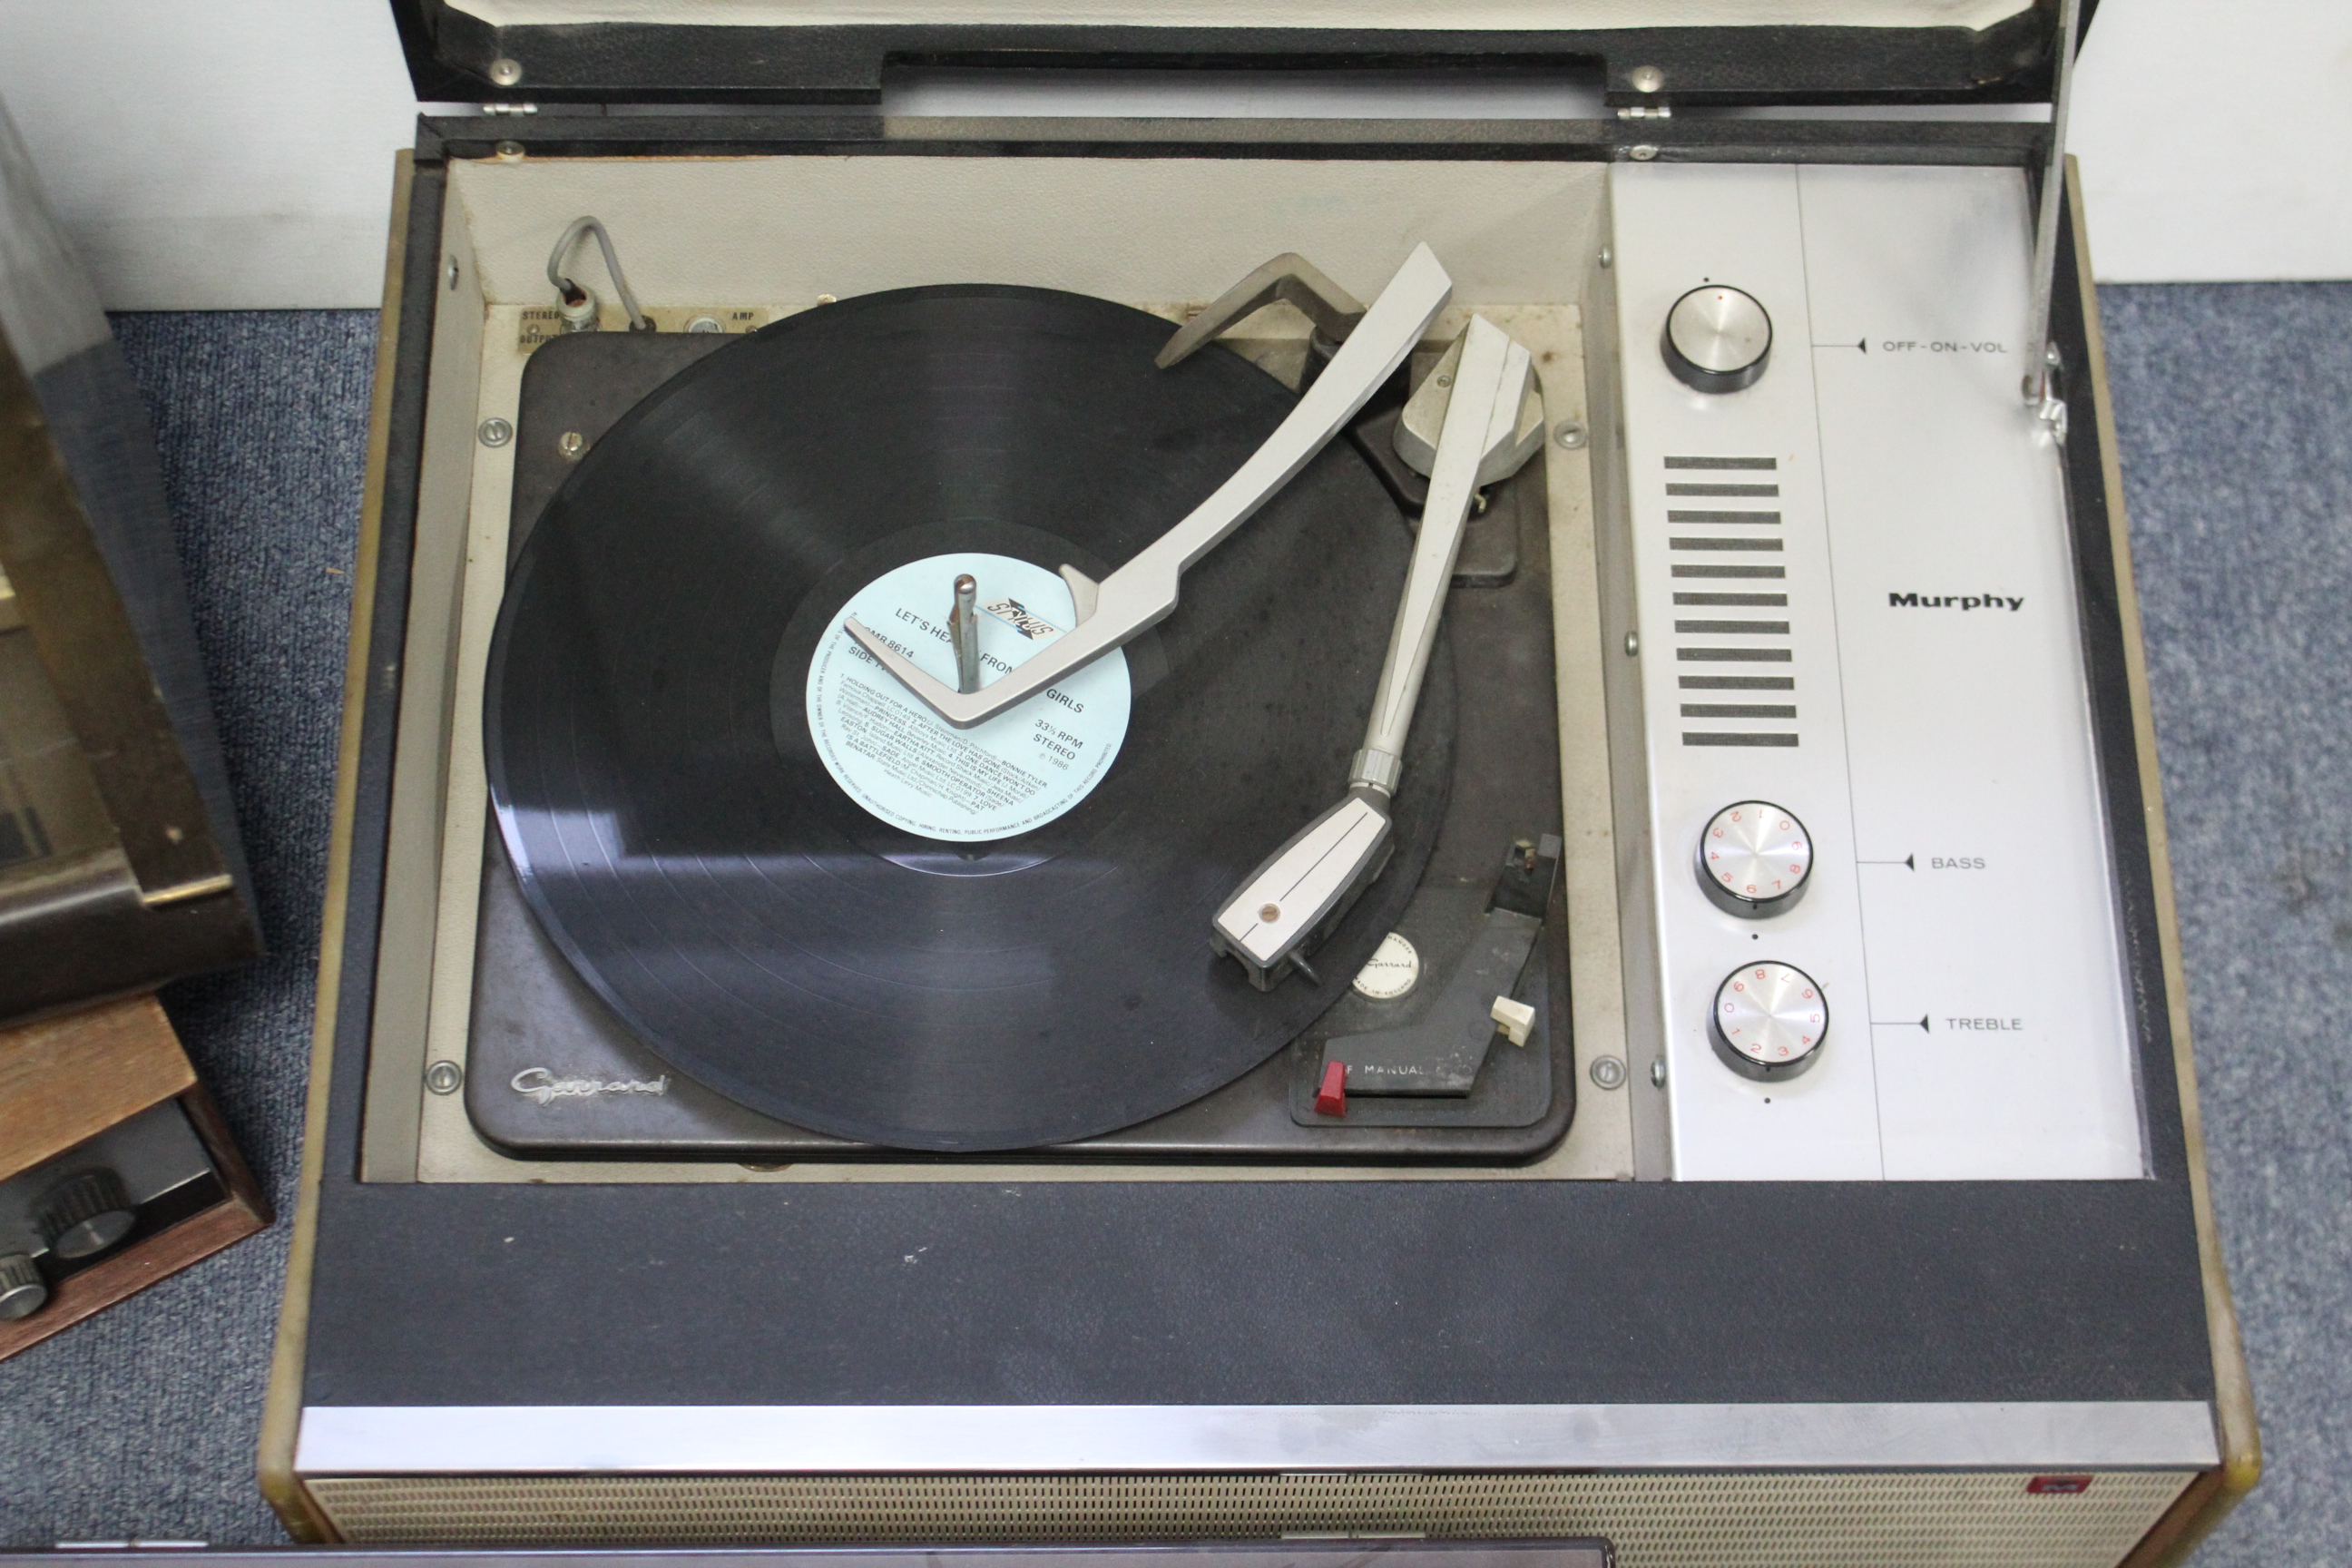 A Leak “Stereo 30” FM tuner; a Philips “N4414” reel-to-reel tape recorder; a Murphy turntable; & a - Image 3 of 4